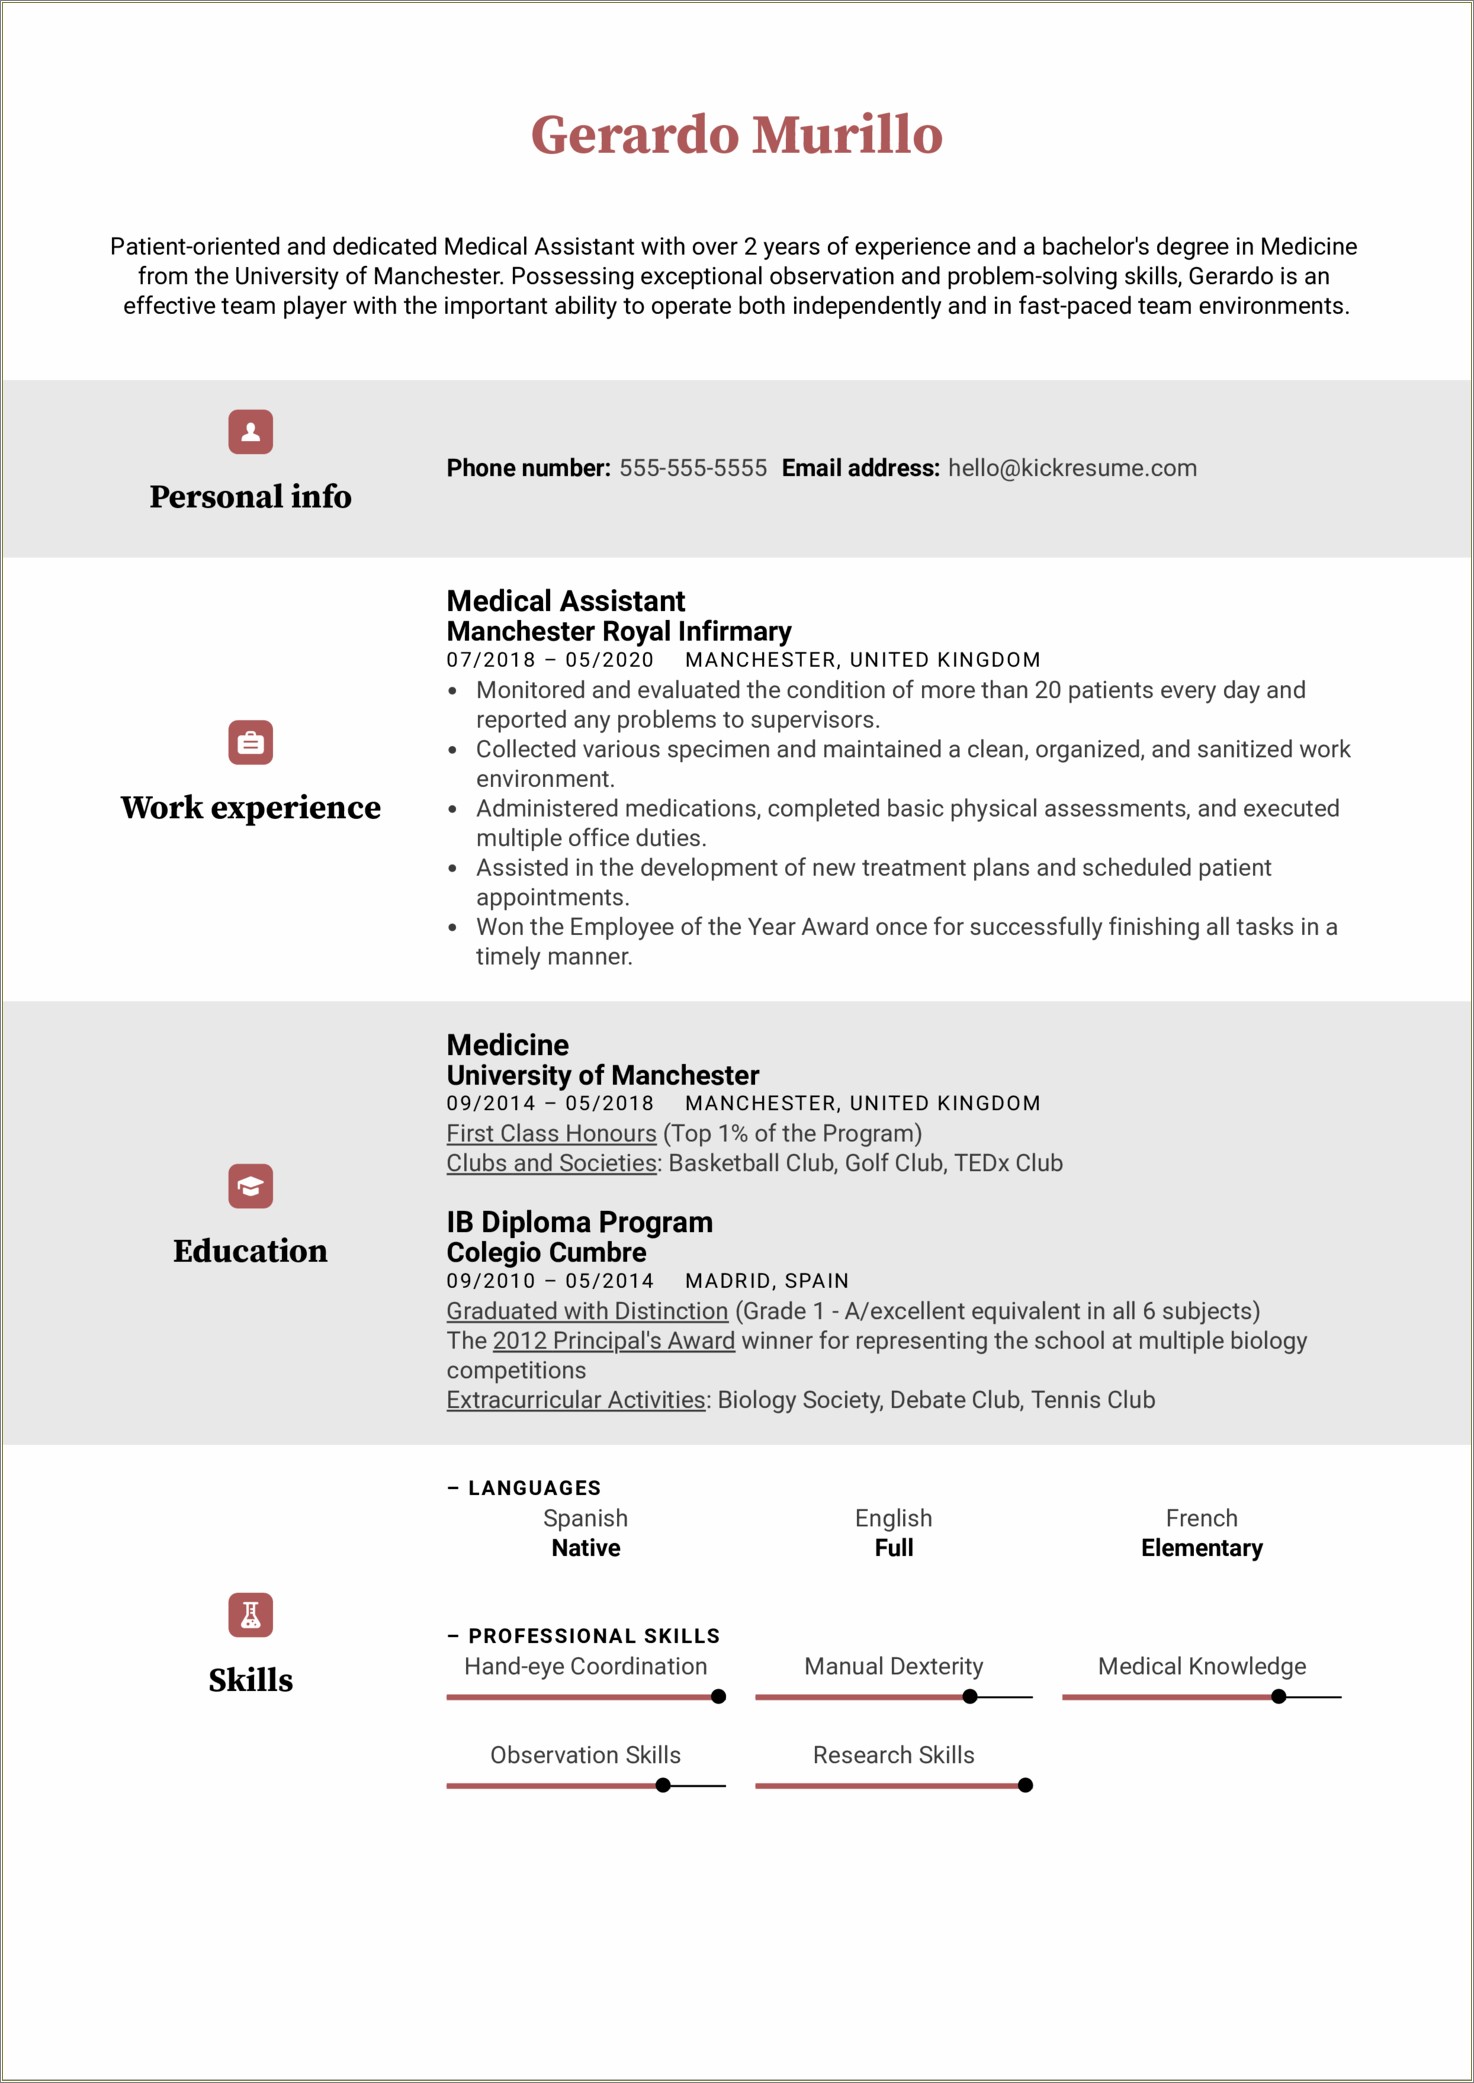 Sample Resume For Medical Assistant At Orthpedic Surgeon